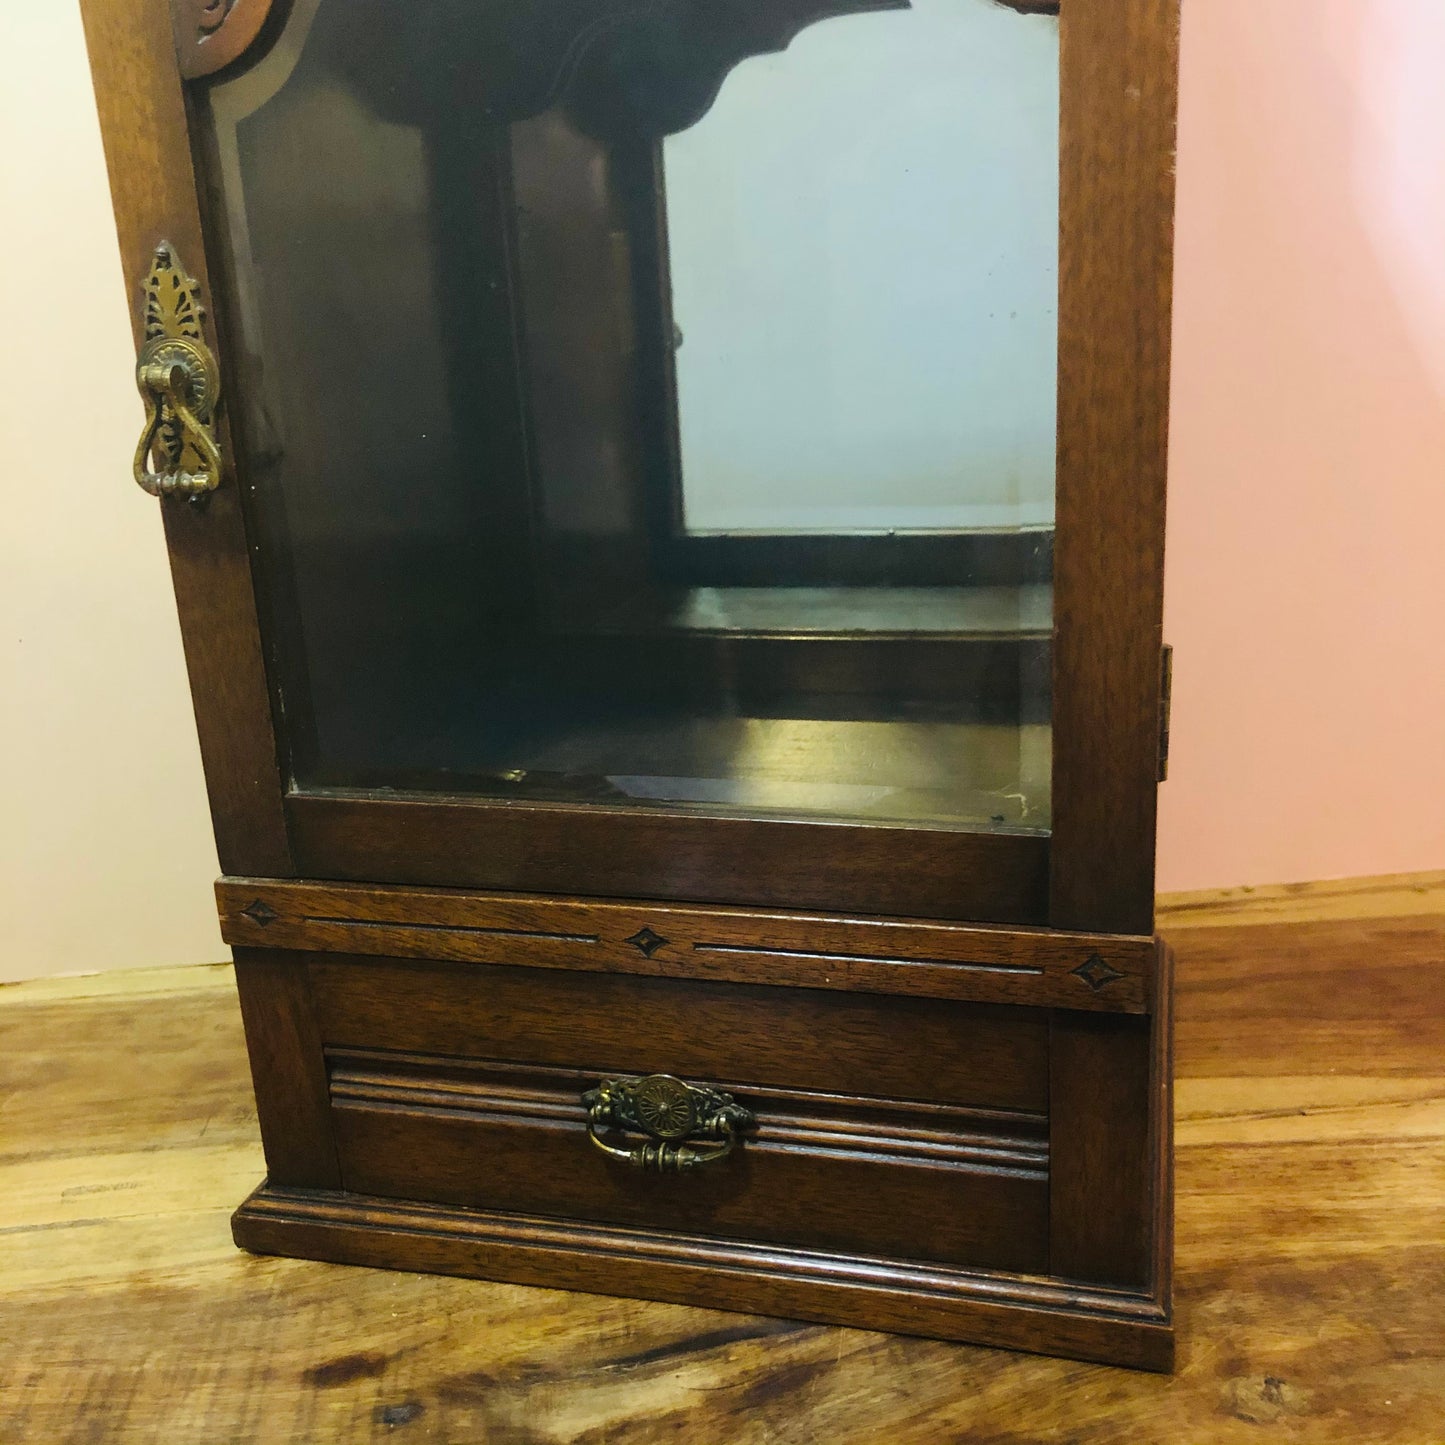 The Skater Albert - Small Antique Mirrored Display Cabinet